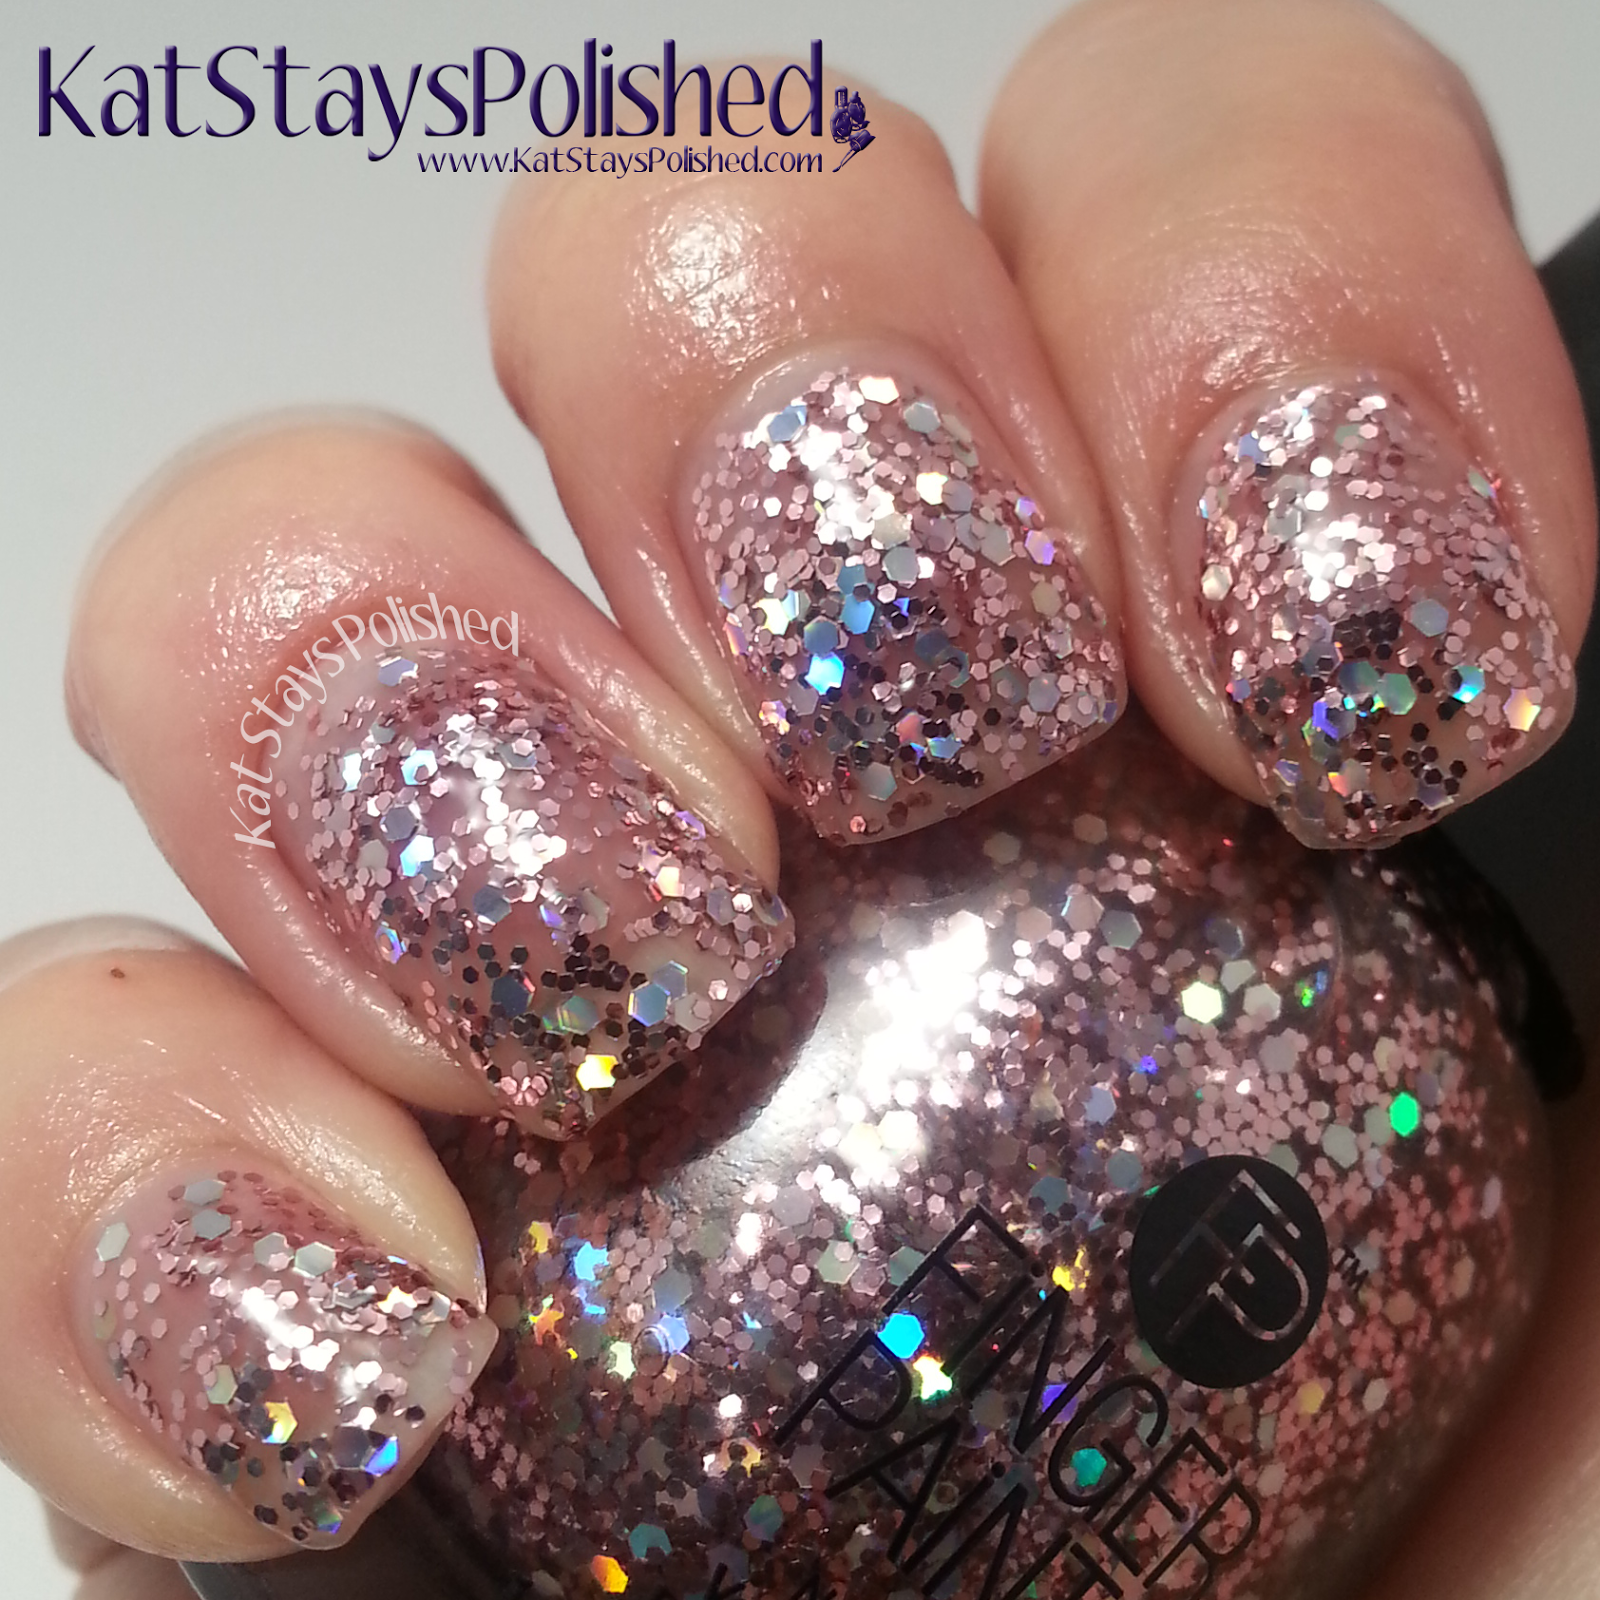 FingerPaints - Bright Lights Big City - In the City, Lookin' Pretty | Kat Stays Polished